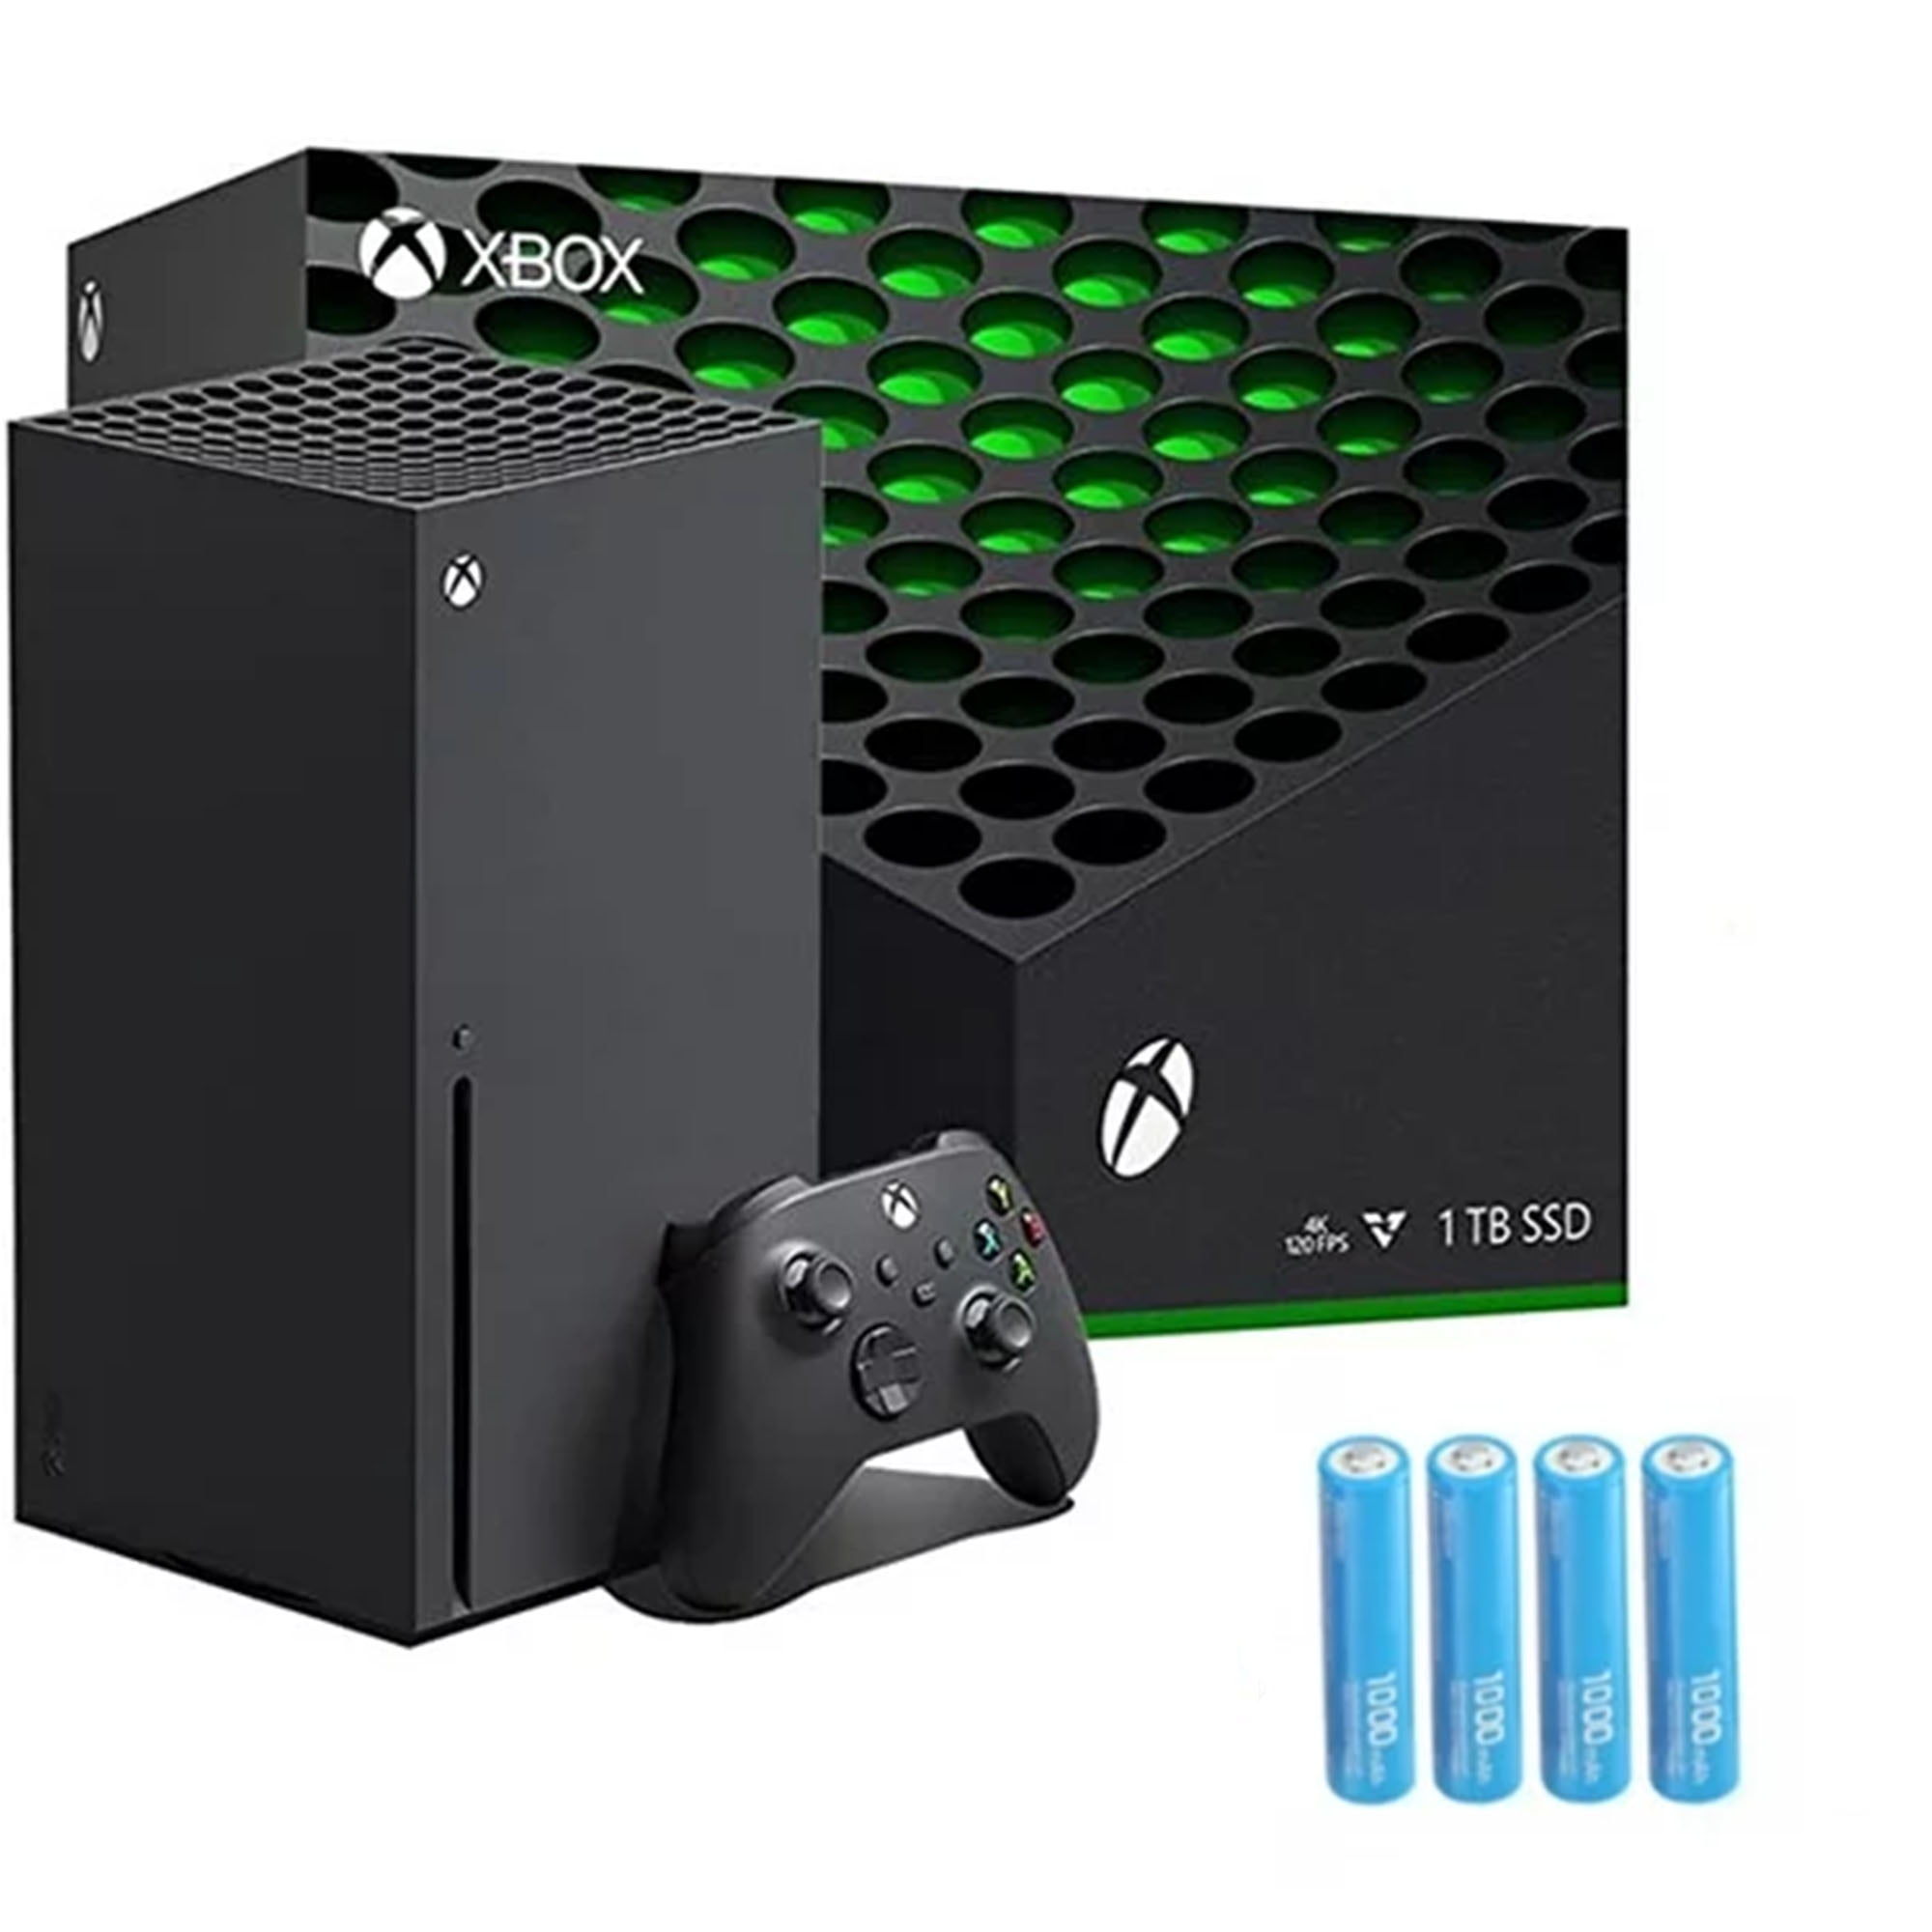 Rent to Own Microsoft Xbox Series X 1TB Console at Aaron's today!